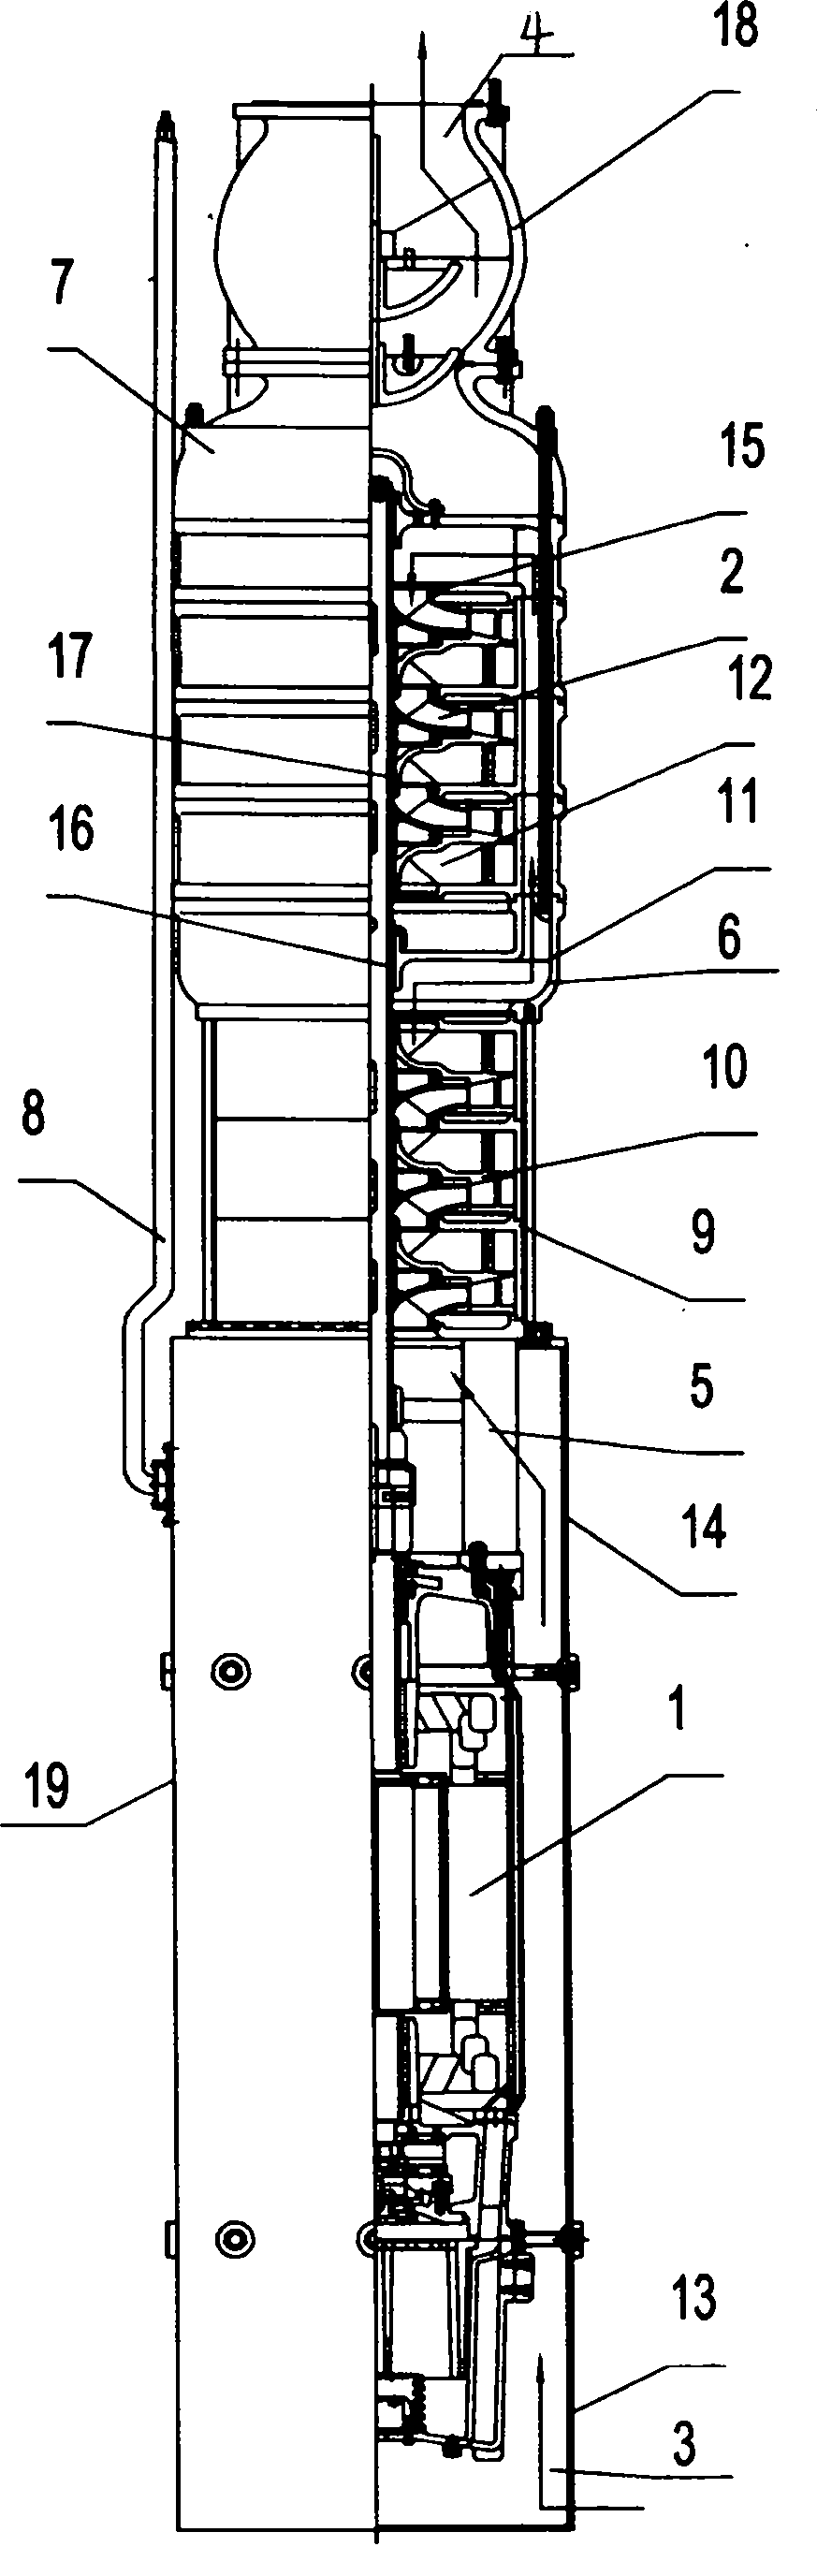 Single downdraft electric driving pump structure capable of automatically balancing axial force